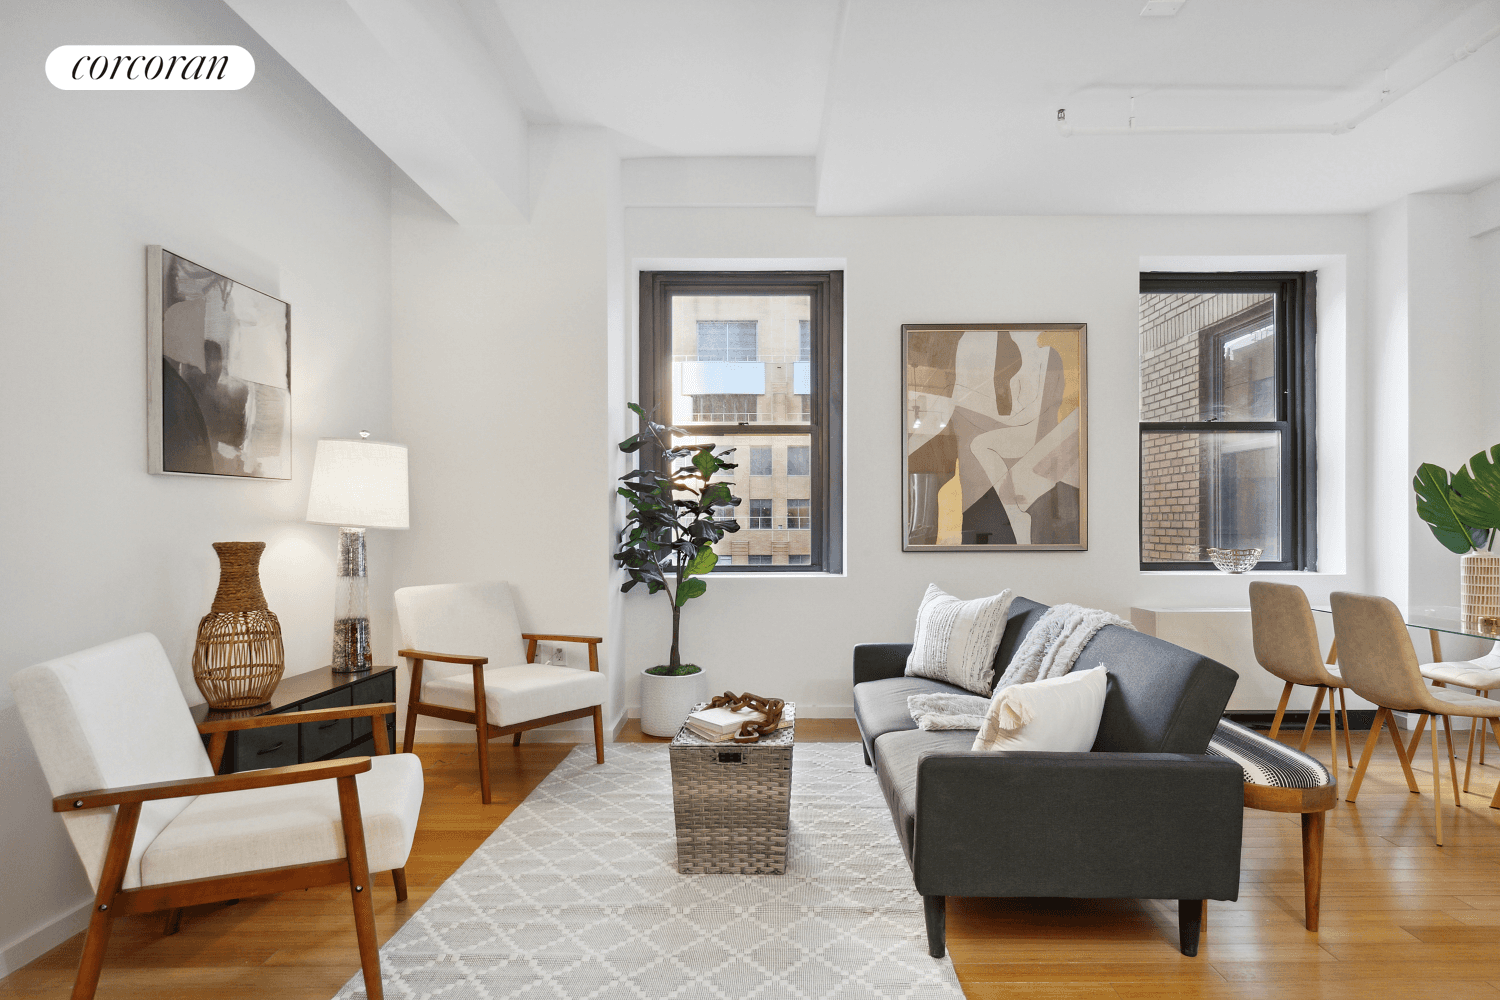 A classic loft home in the iconic BellTel Lofts.